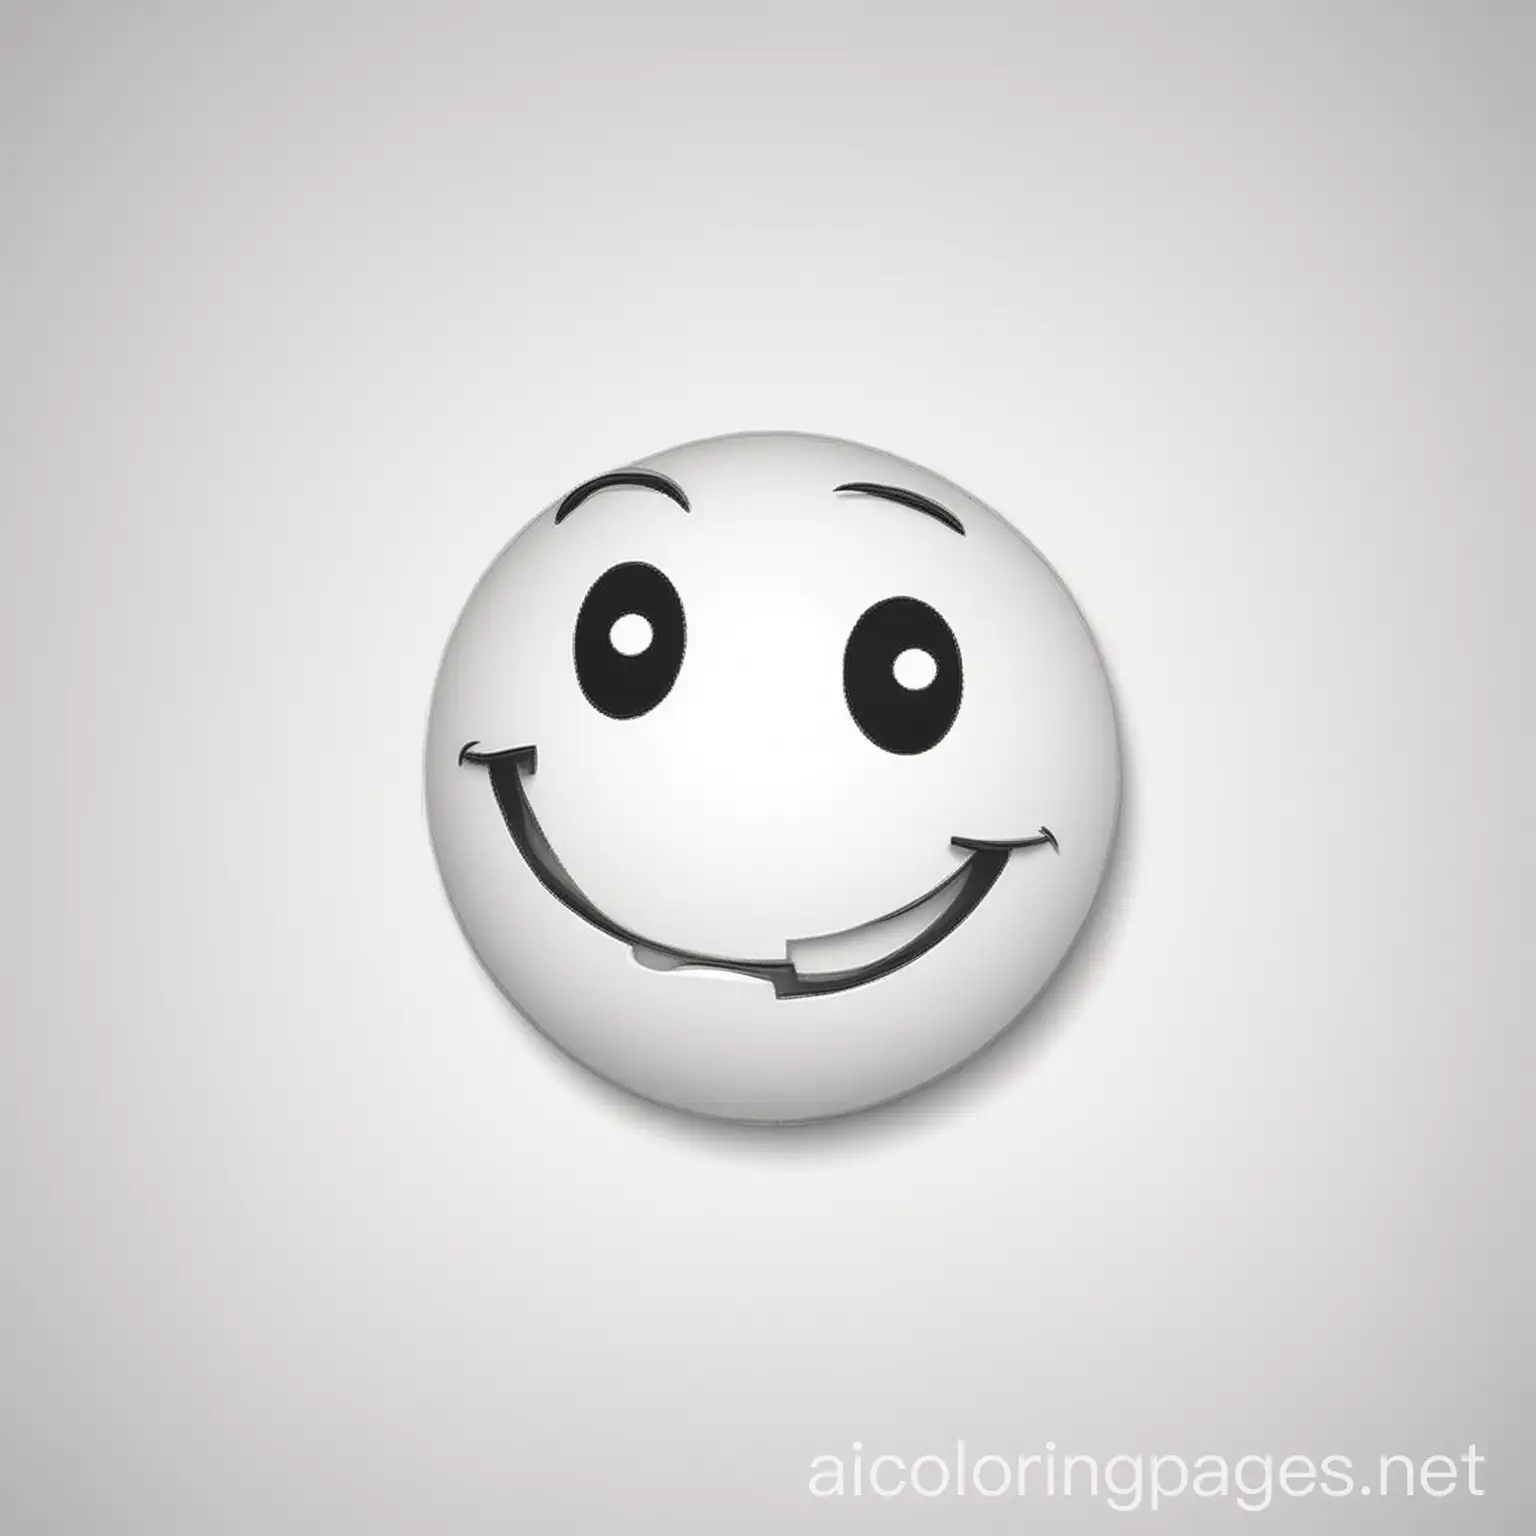 Simple-Emoji-Happiness-Coloring-Page-Joyful-Line-Art-on-White-Background